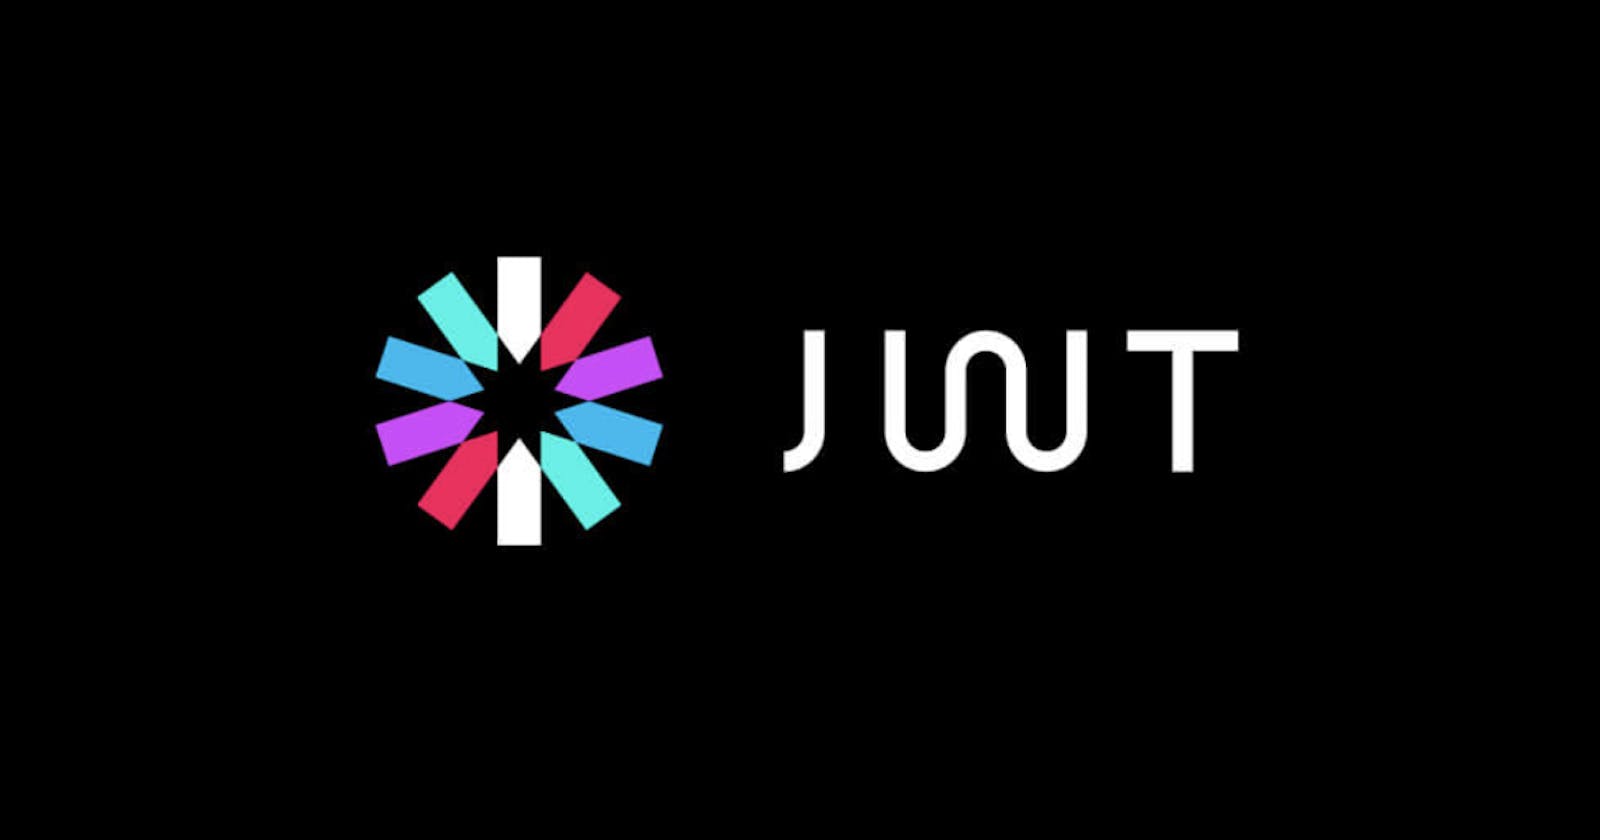 What is JWT?